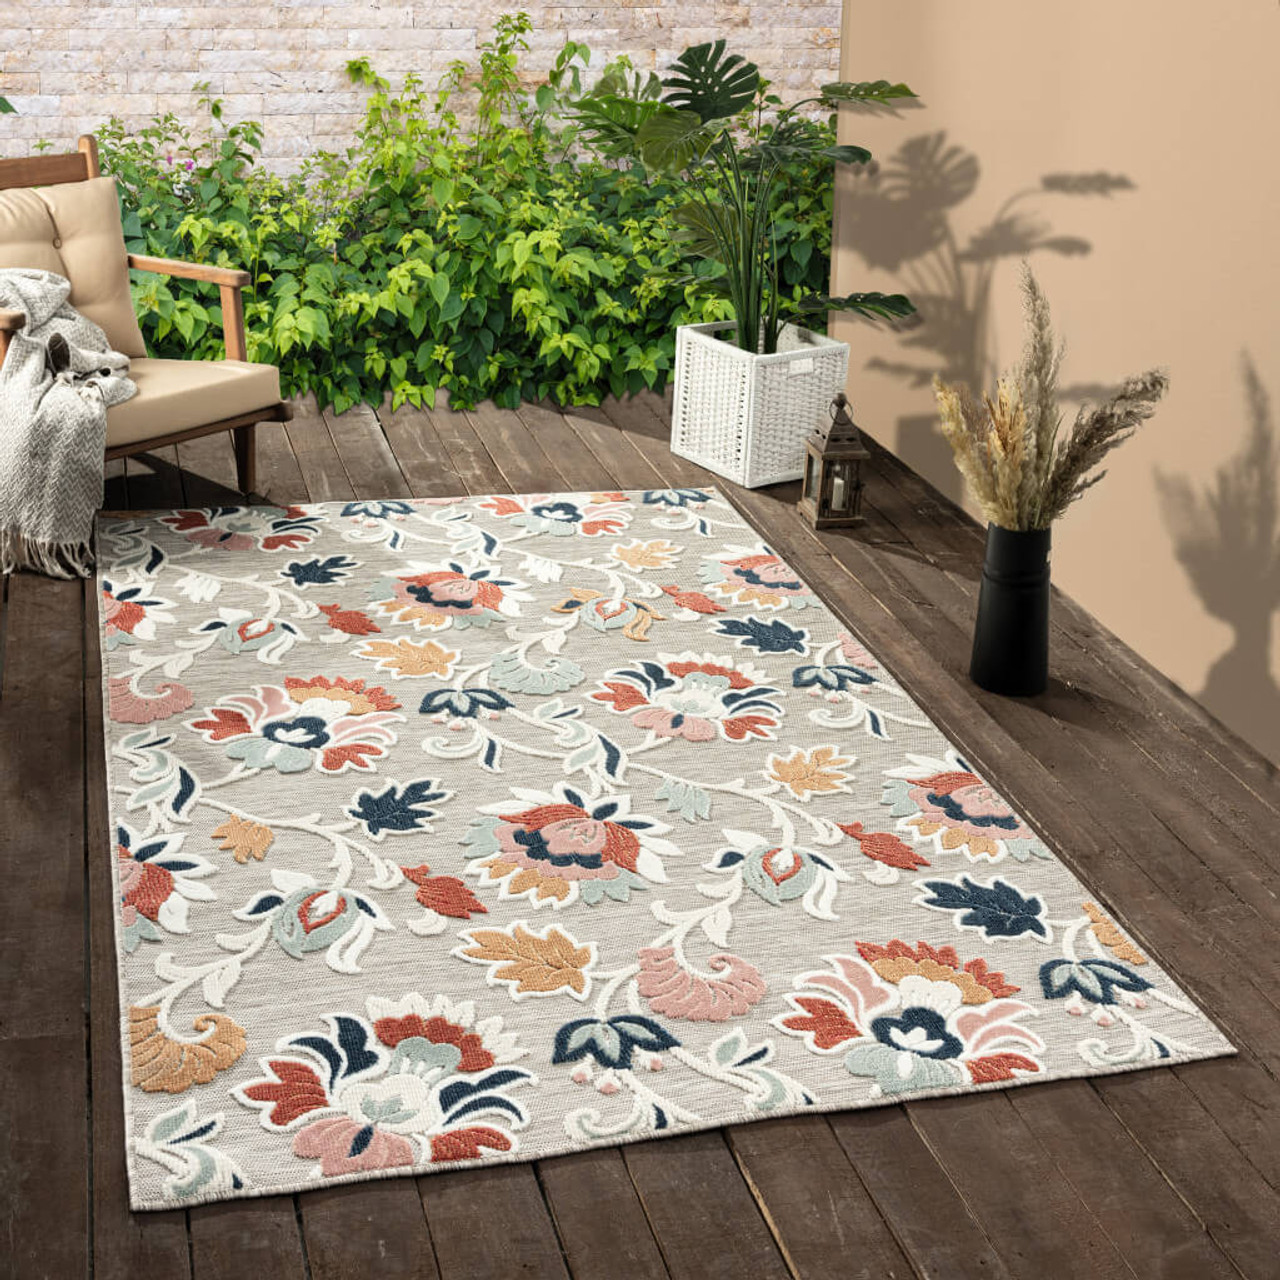 8' X 10' Blue And Gray Floral Stain Resistant Indoor Outdoor Area Rug